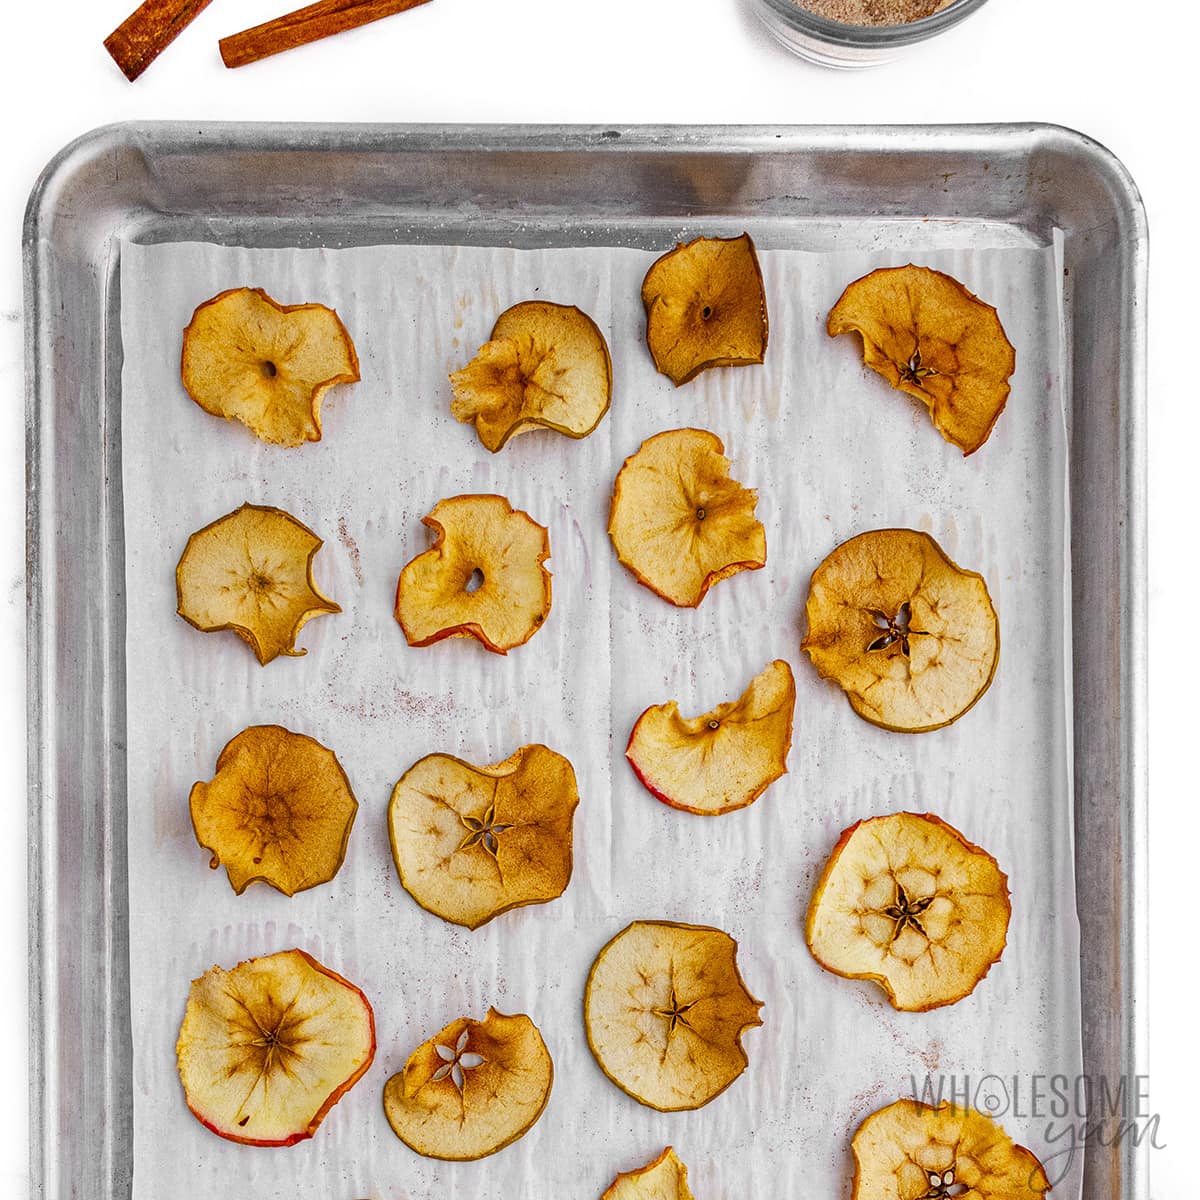 Baked apple chips on a baking sheet.